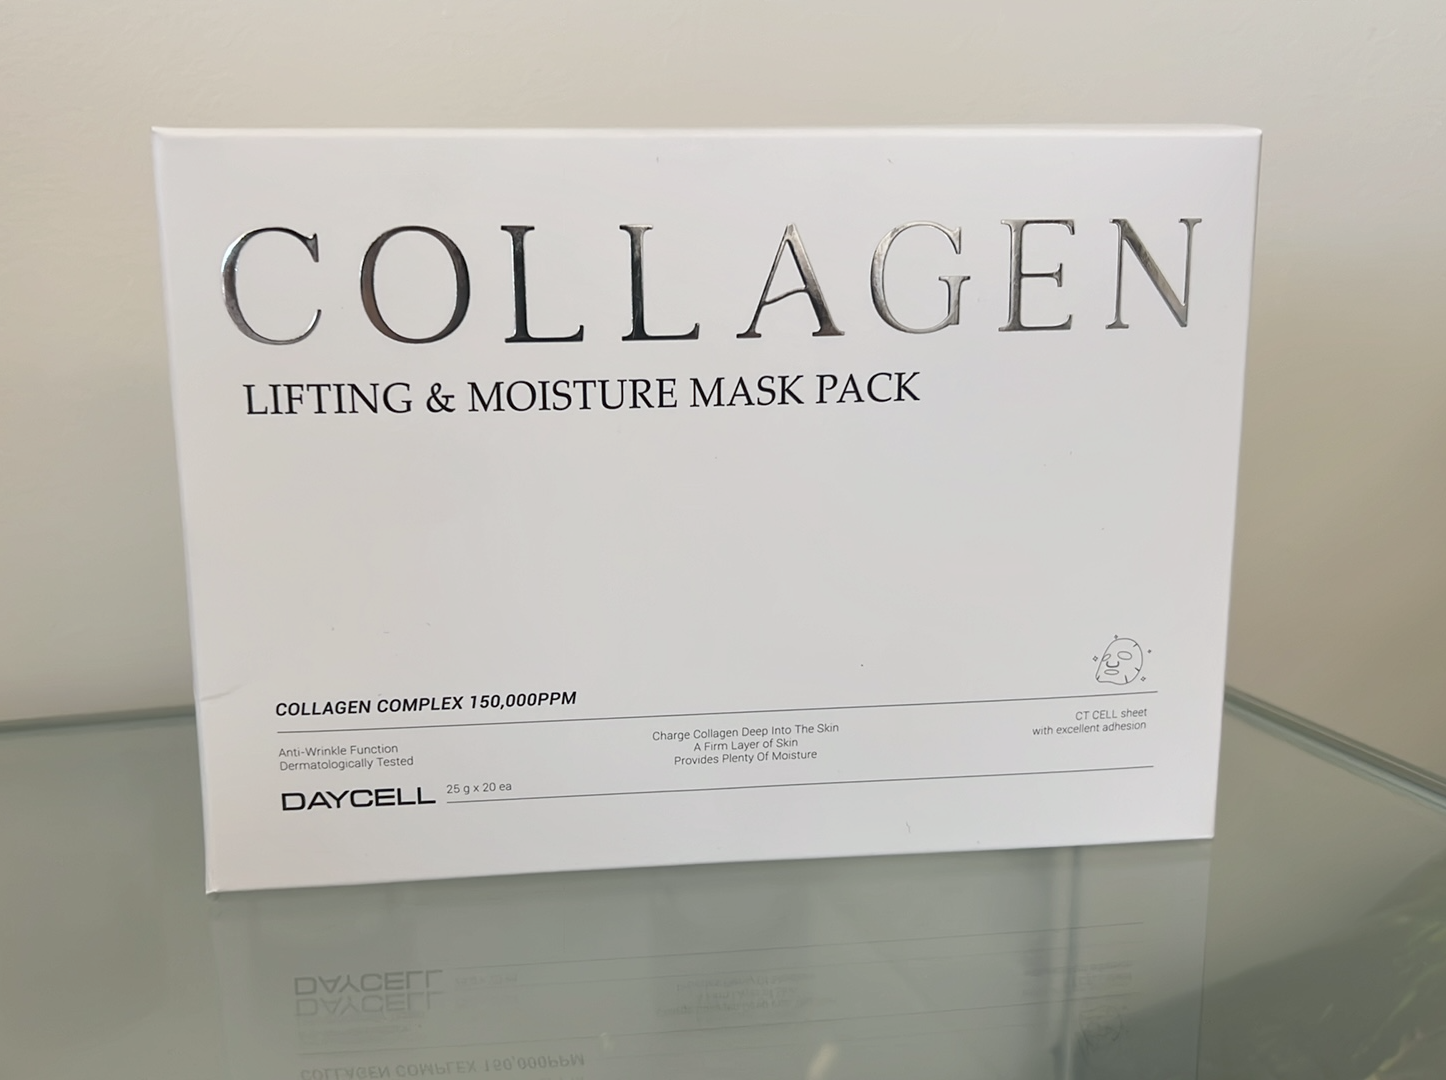 Collagen Lifting & Moisture Mask Pack (Daycell)